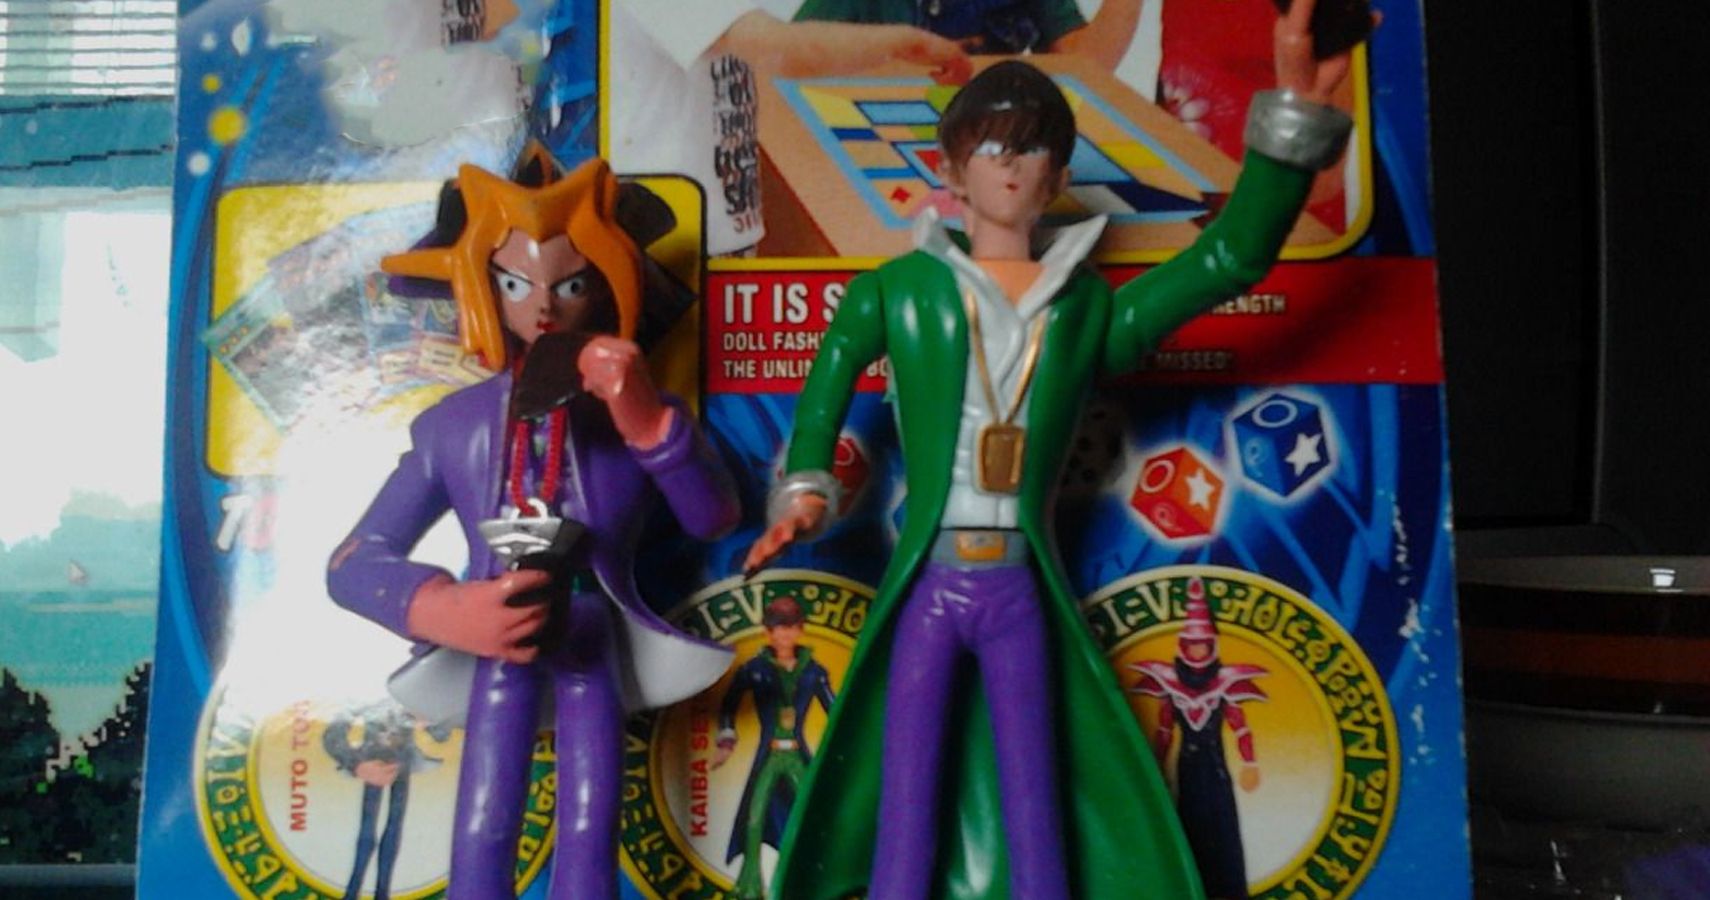 My new bootleg anime figures Are In The Collection #bootlegheroes #boo... |  TikTok